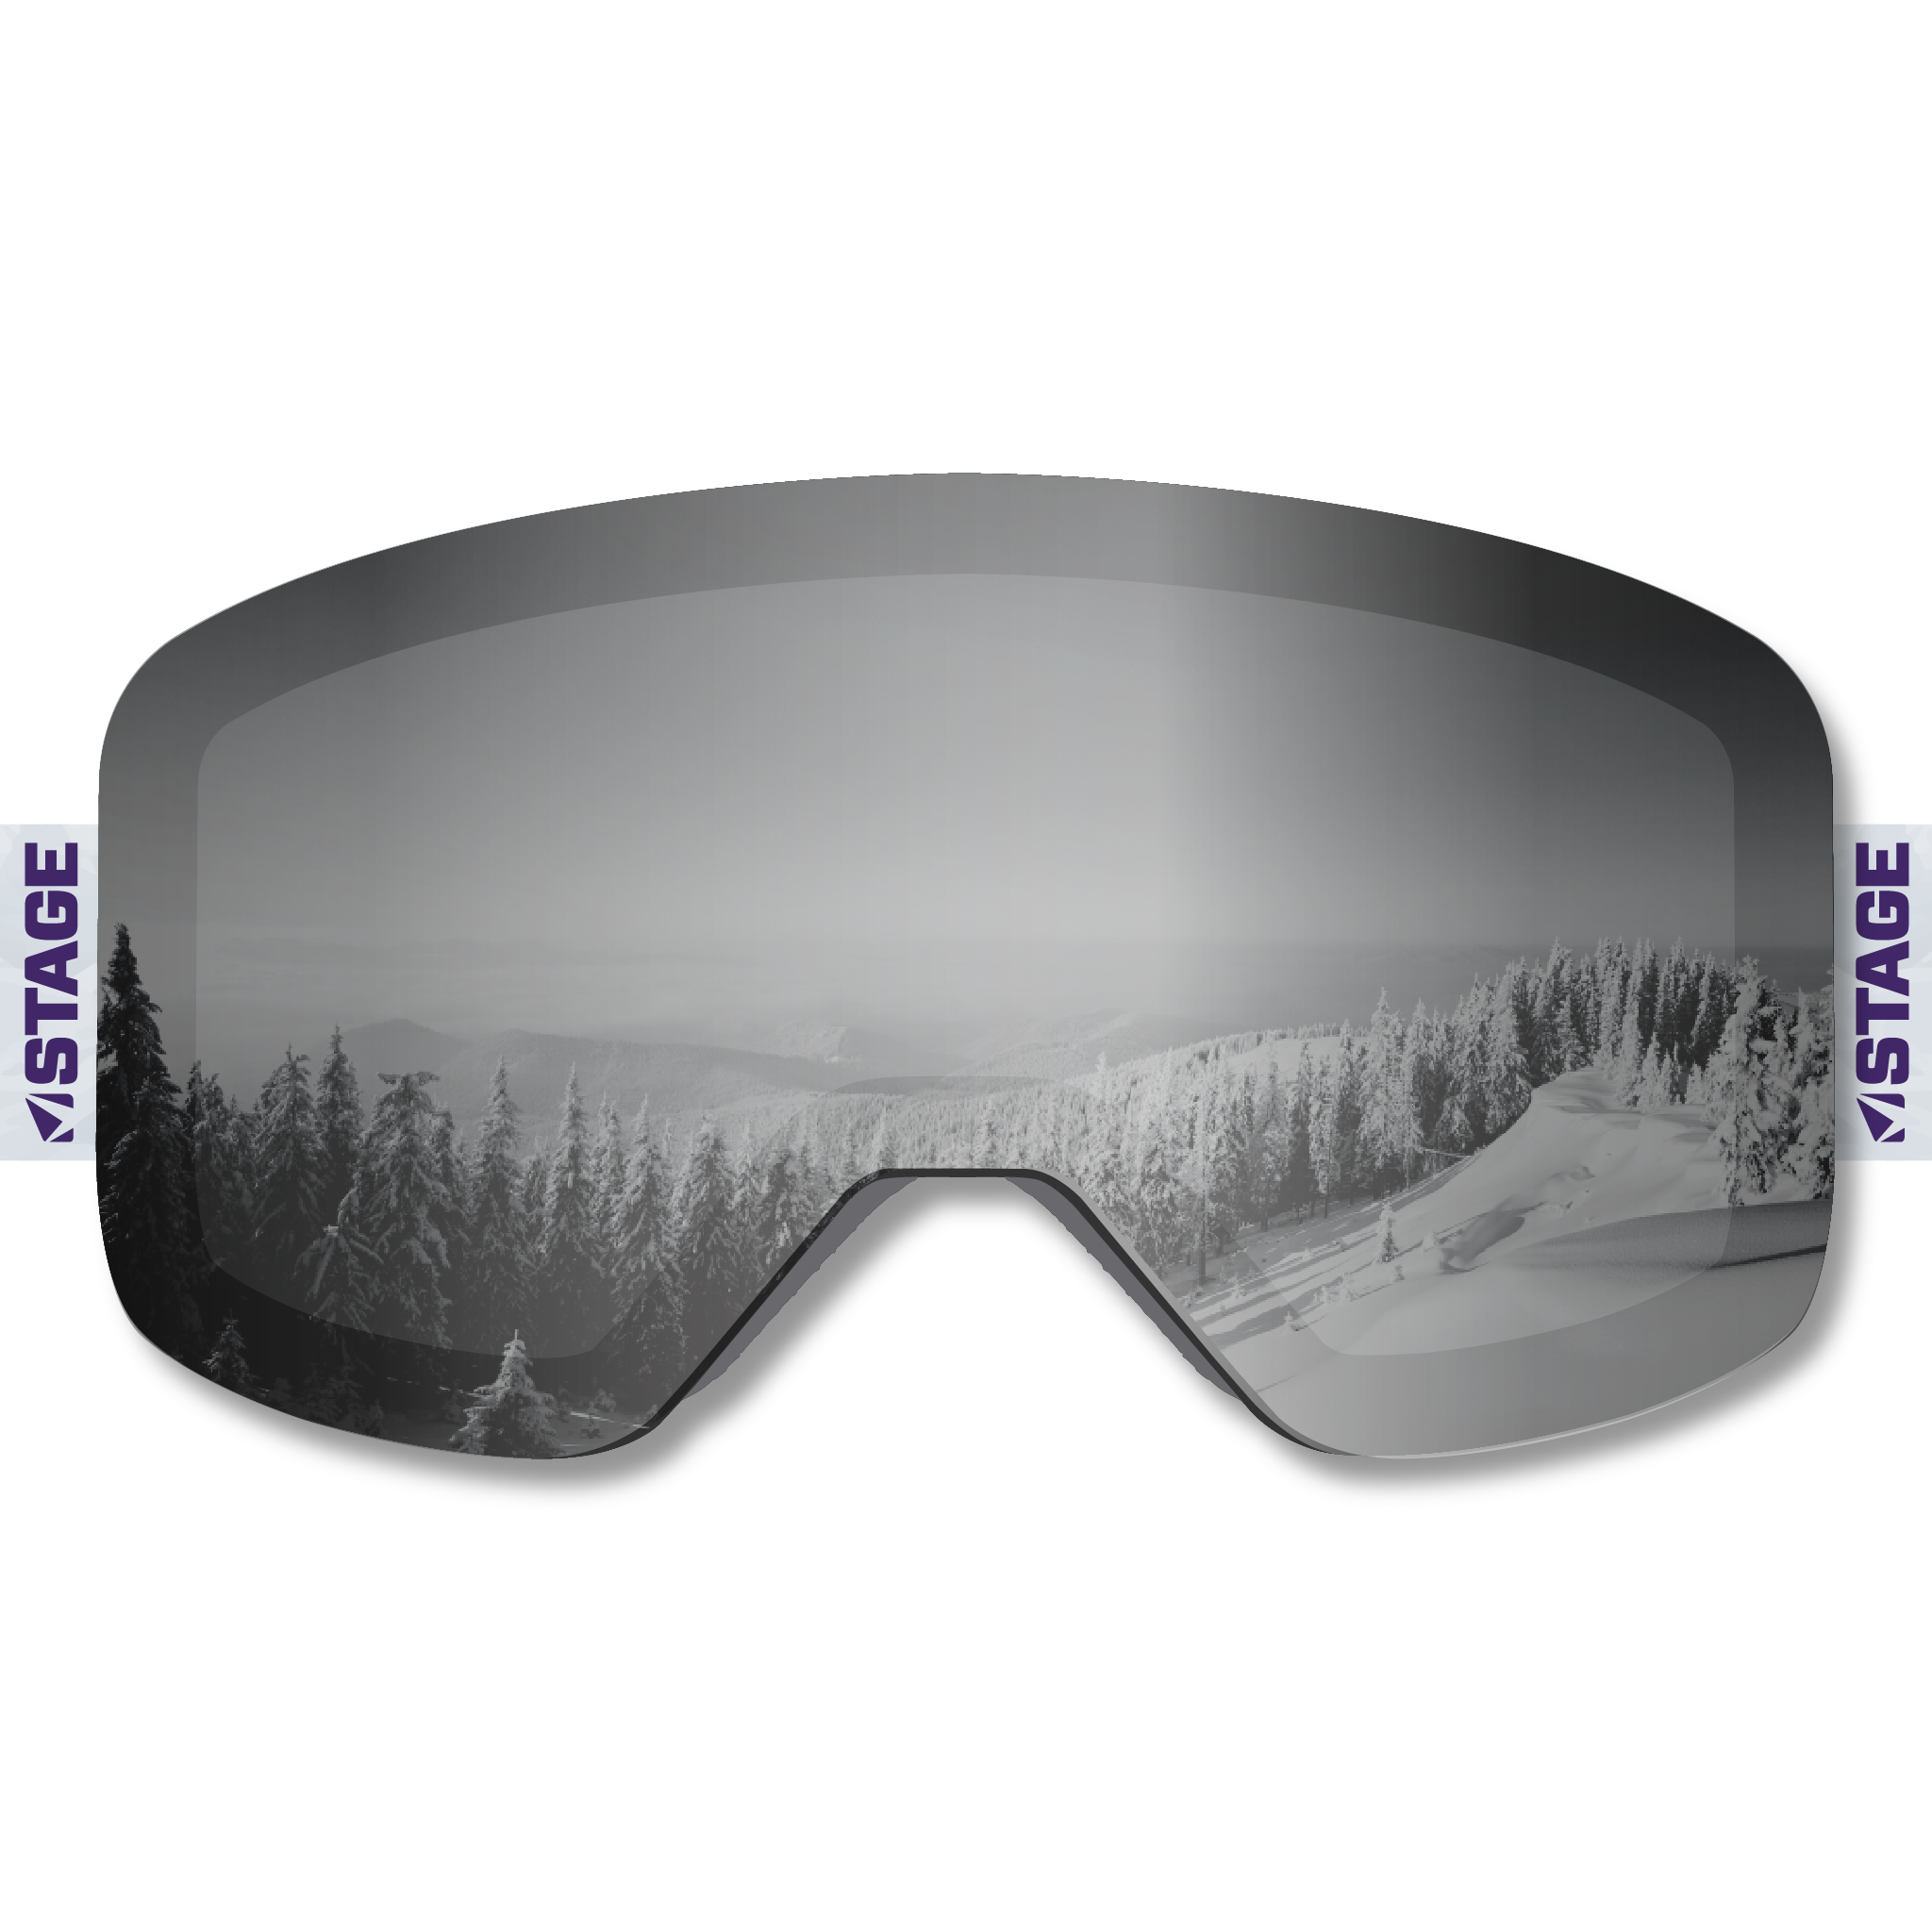 Product Shot featuring a STAGE Custom Frameless Prop Ski Goggle with Mirror Chrome Smoke lens.